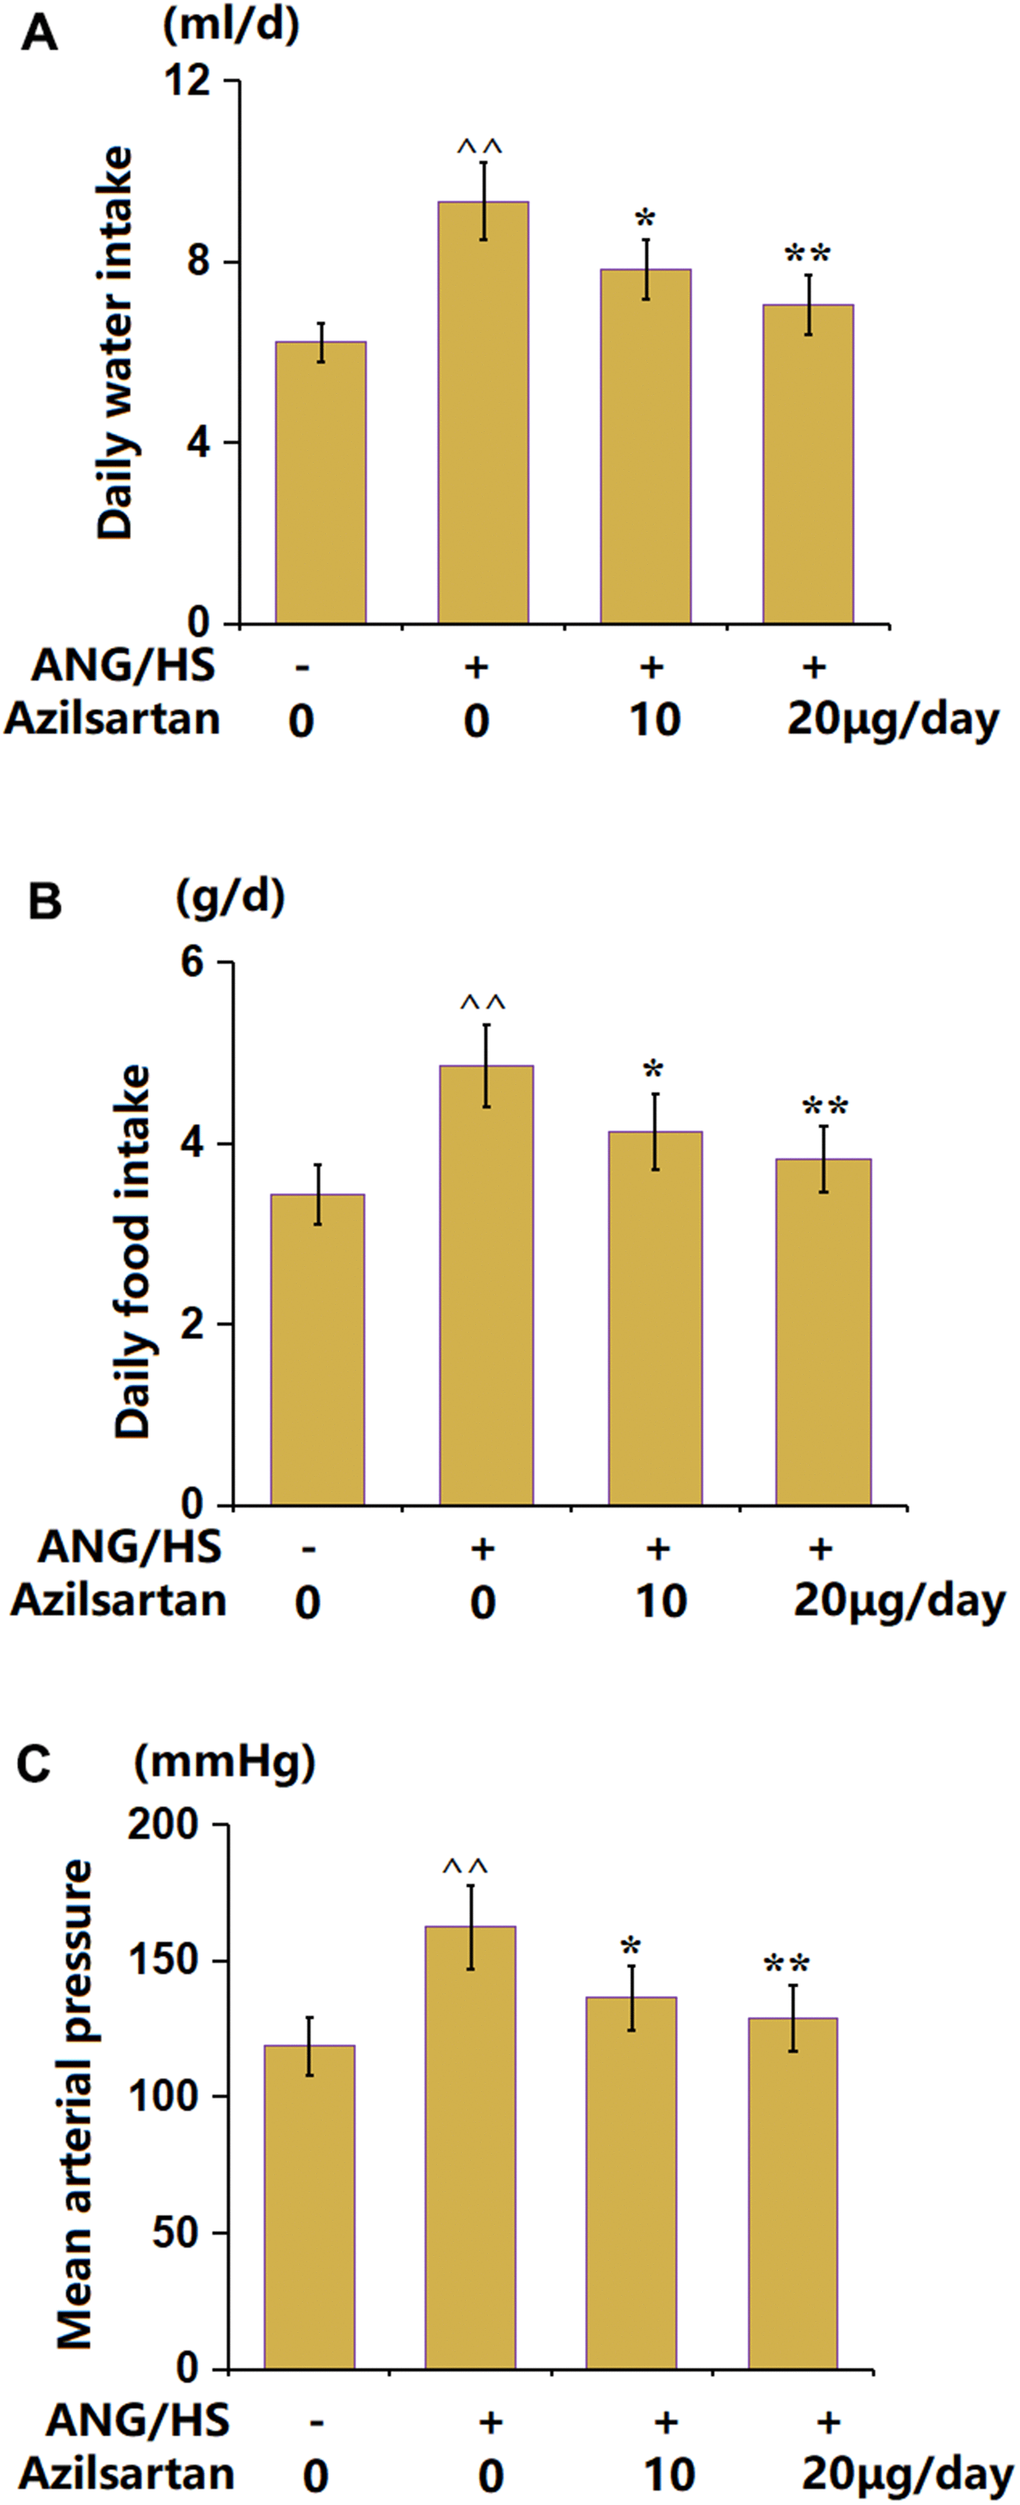 The effects of Azilsartan on ANG/HS-induced hypertension mice. (A) daily water intake; (B) daily food intake; (C) Mean arterial pressure (n=6, ^^, P